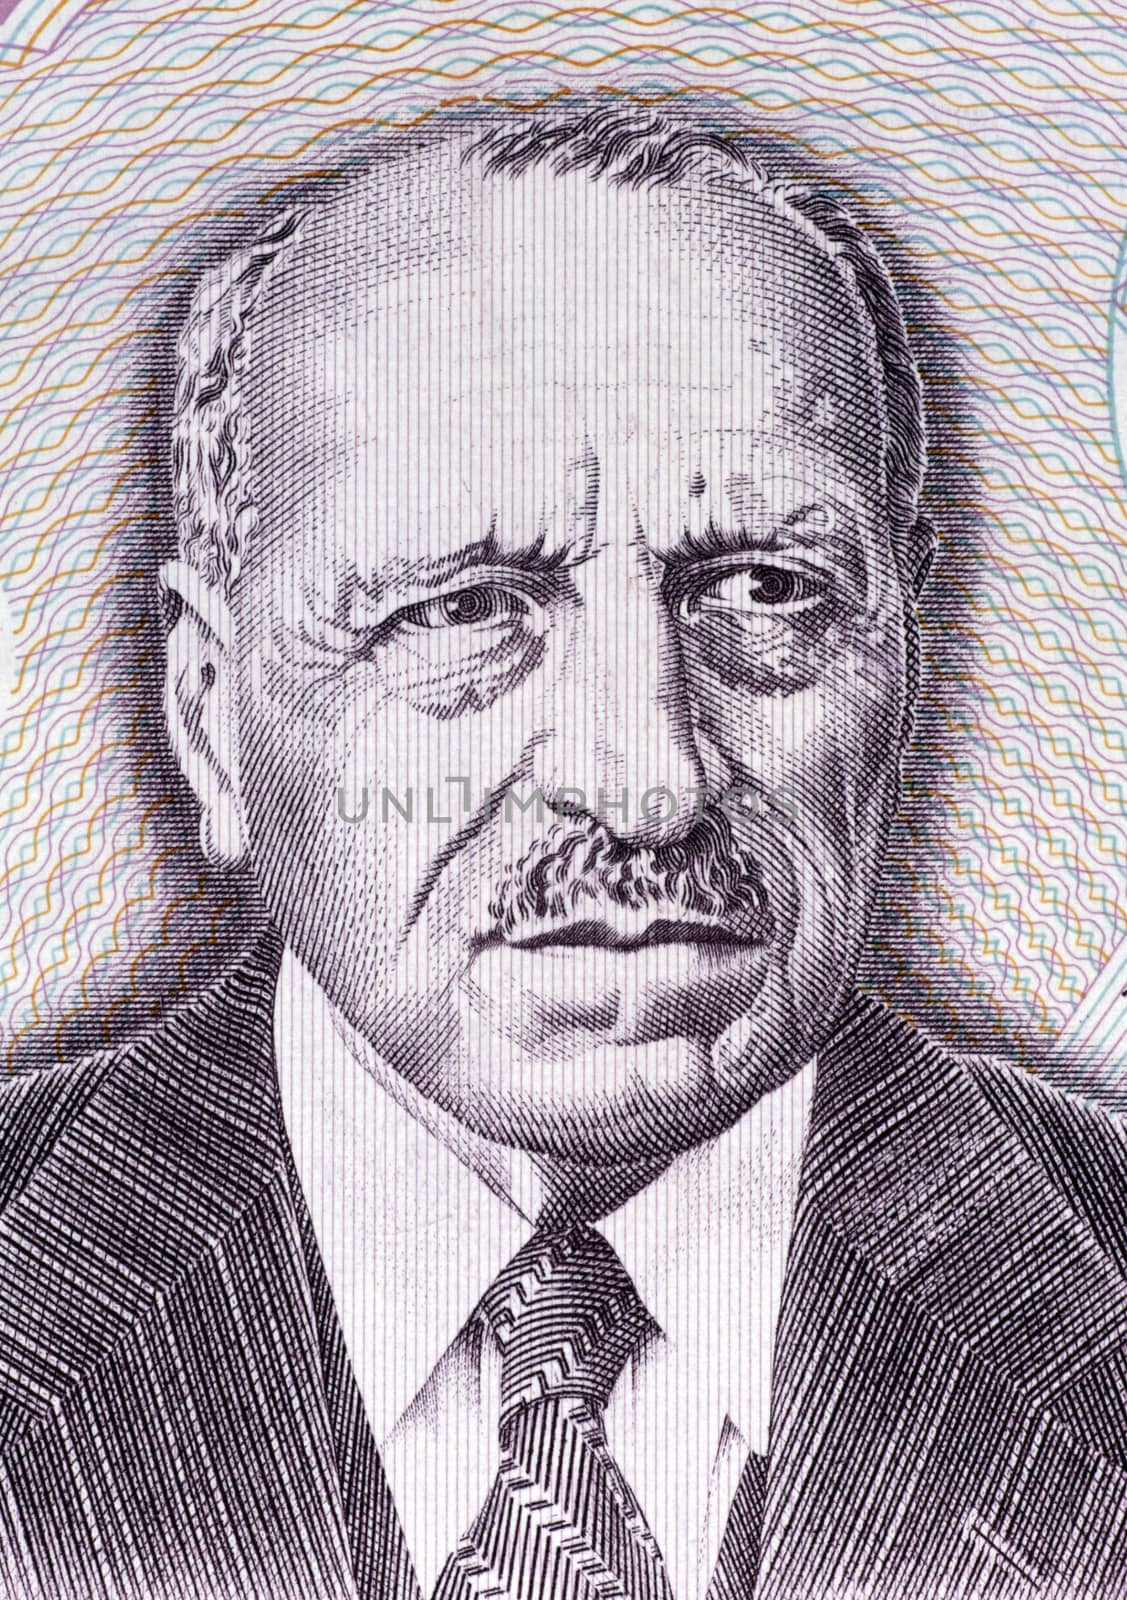 Georgios Papanikolaou (1883-1962) on 10000 Drachmes 1995 Banknote from Greece. Greek pioneer in cytopathology and early cancer detection. Inventor of the "Pap test".